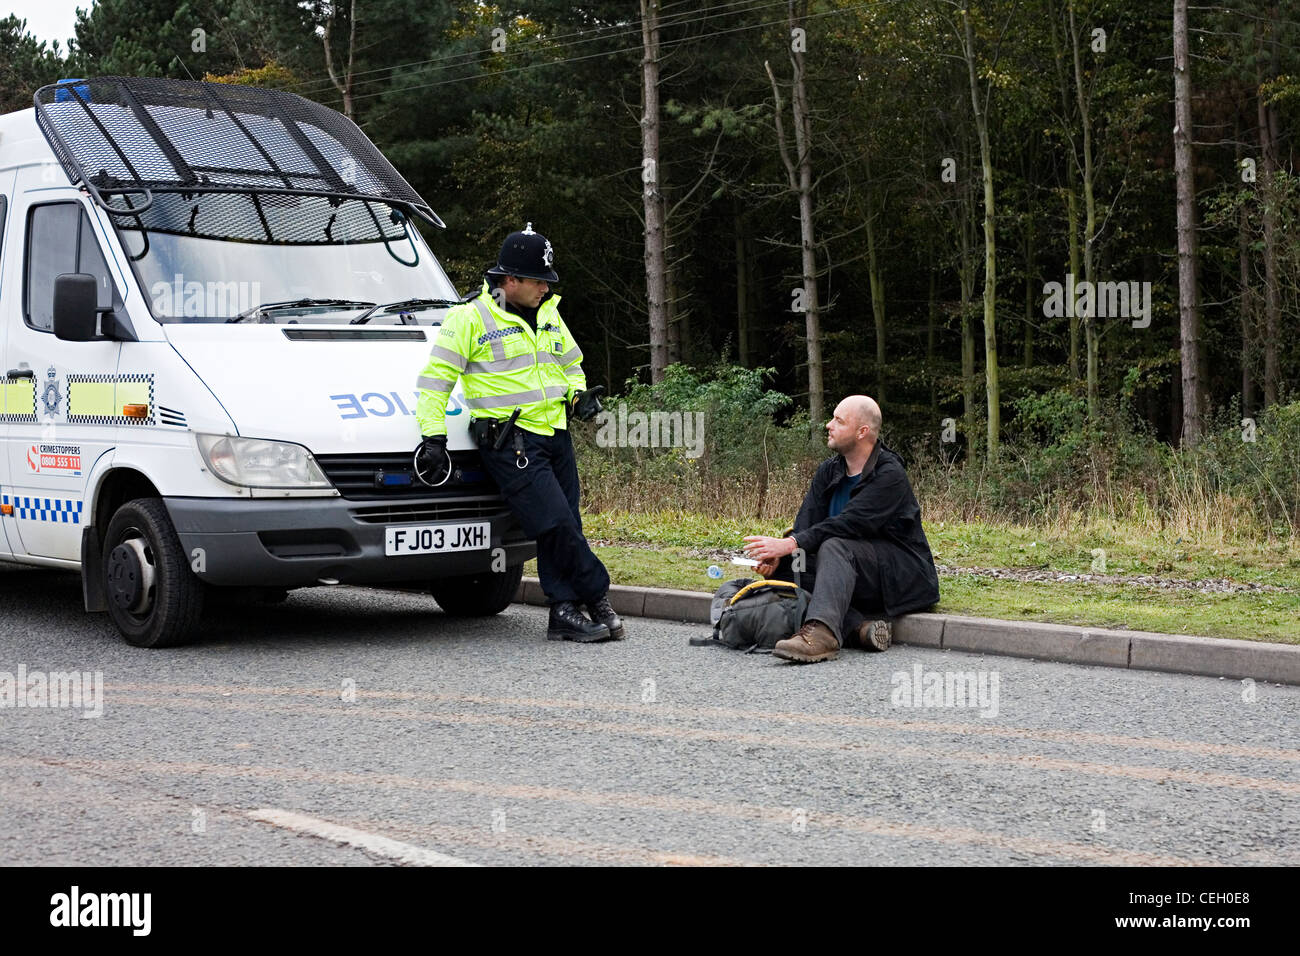 Man under arrest sat on the side of the road next to a police officer and a riot van. Stock Photo